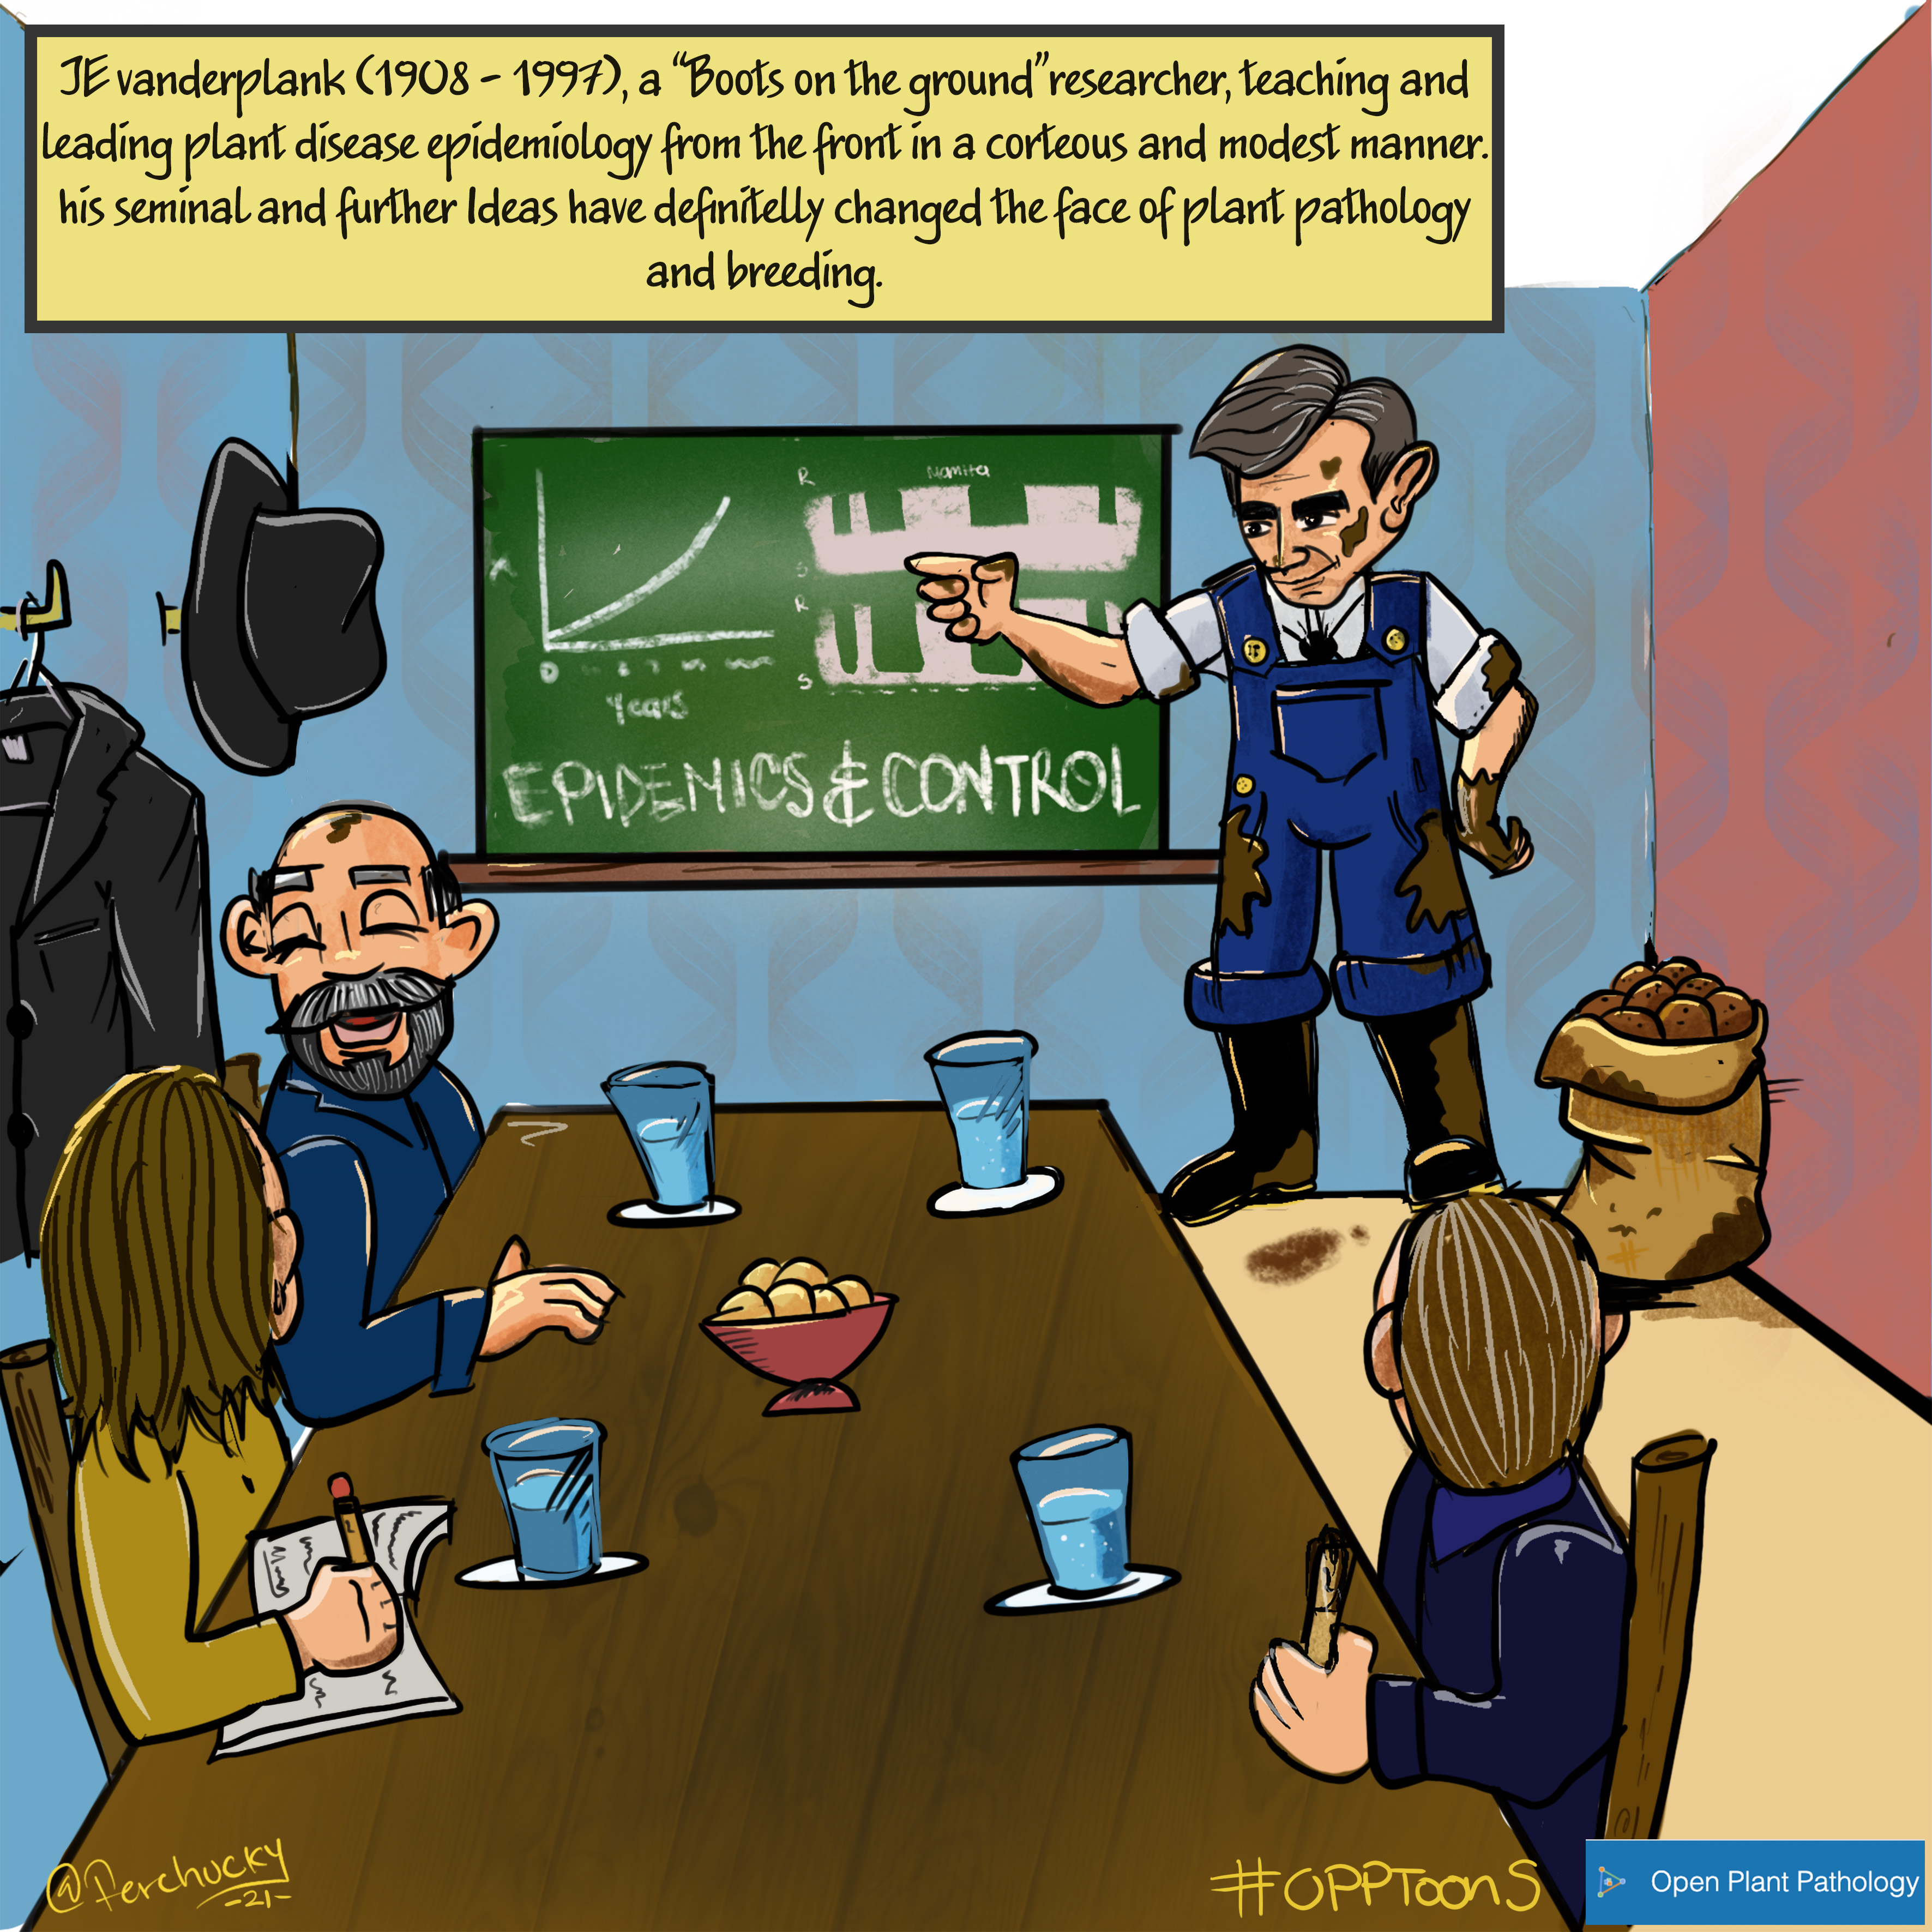 Cartoon of JE Vanderplank teaching a class in muddy work clothes. Caption: JE Vanderplank (1908–1997), a “Boots on the ground” researcher, teaching and leading plant disease epidemiology from the front in a courteous and modest manner. His seminal and further ideas have definitely changed the face of plant pathology and breeding.